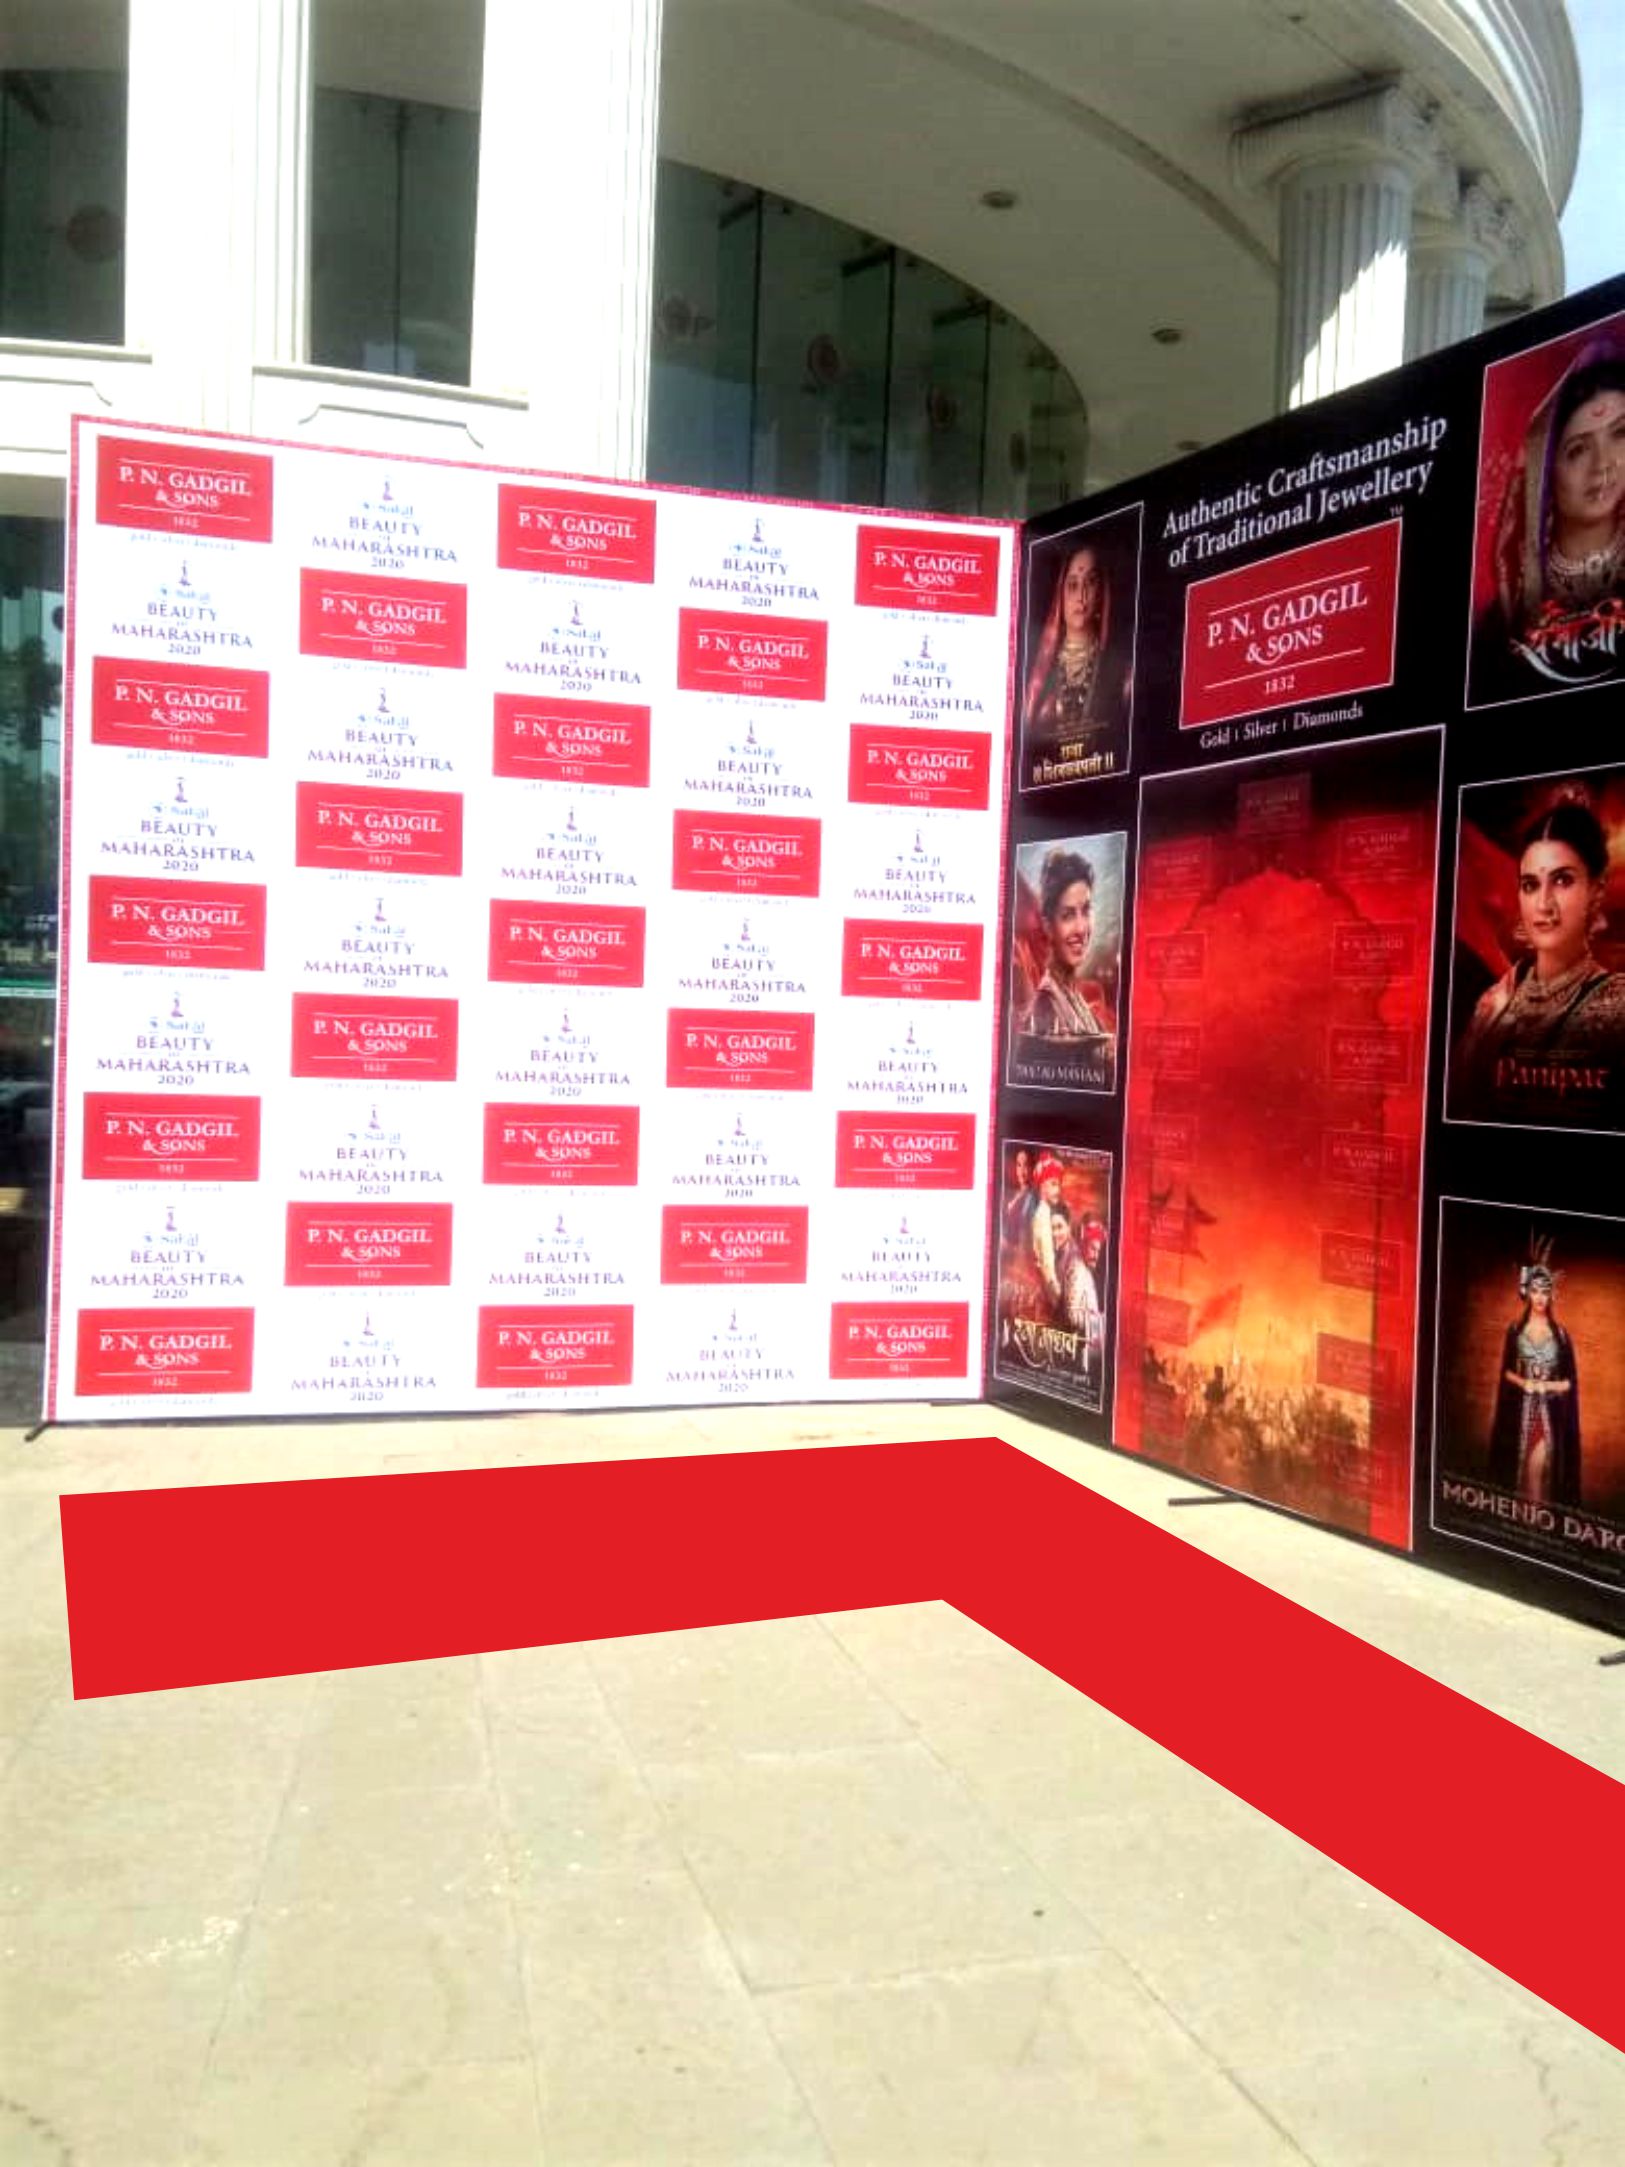 Event backdrop for a red carpet event where people can pose for photographs in front of the sponsors logo background